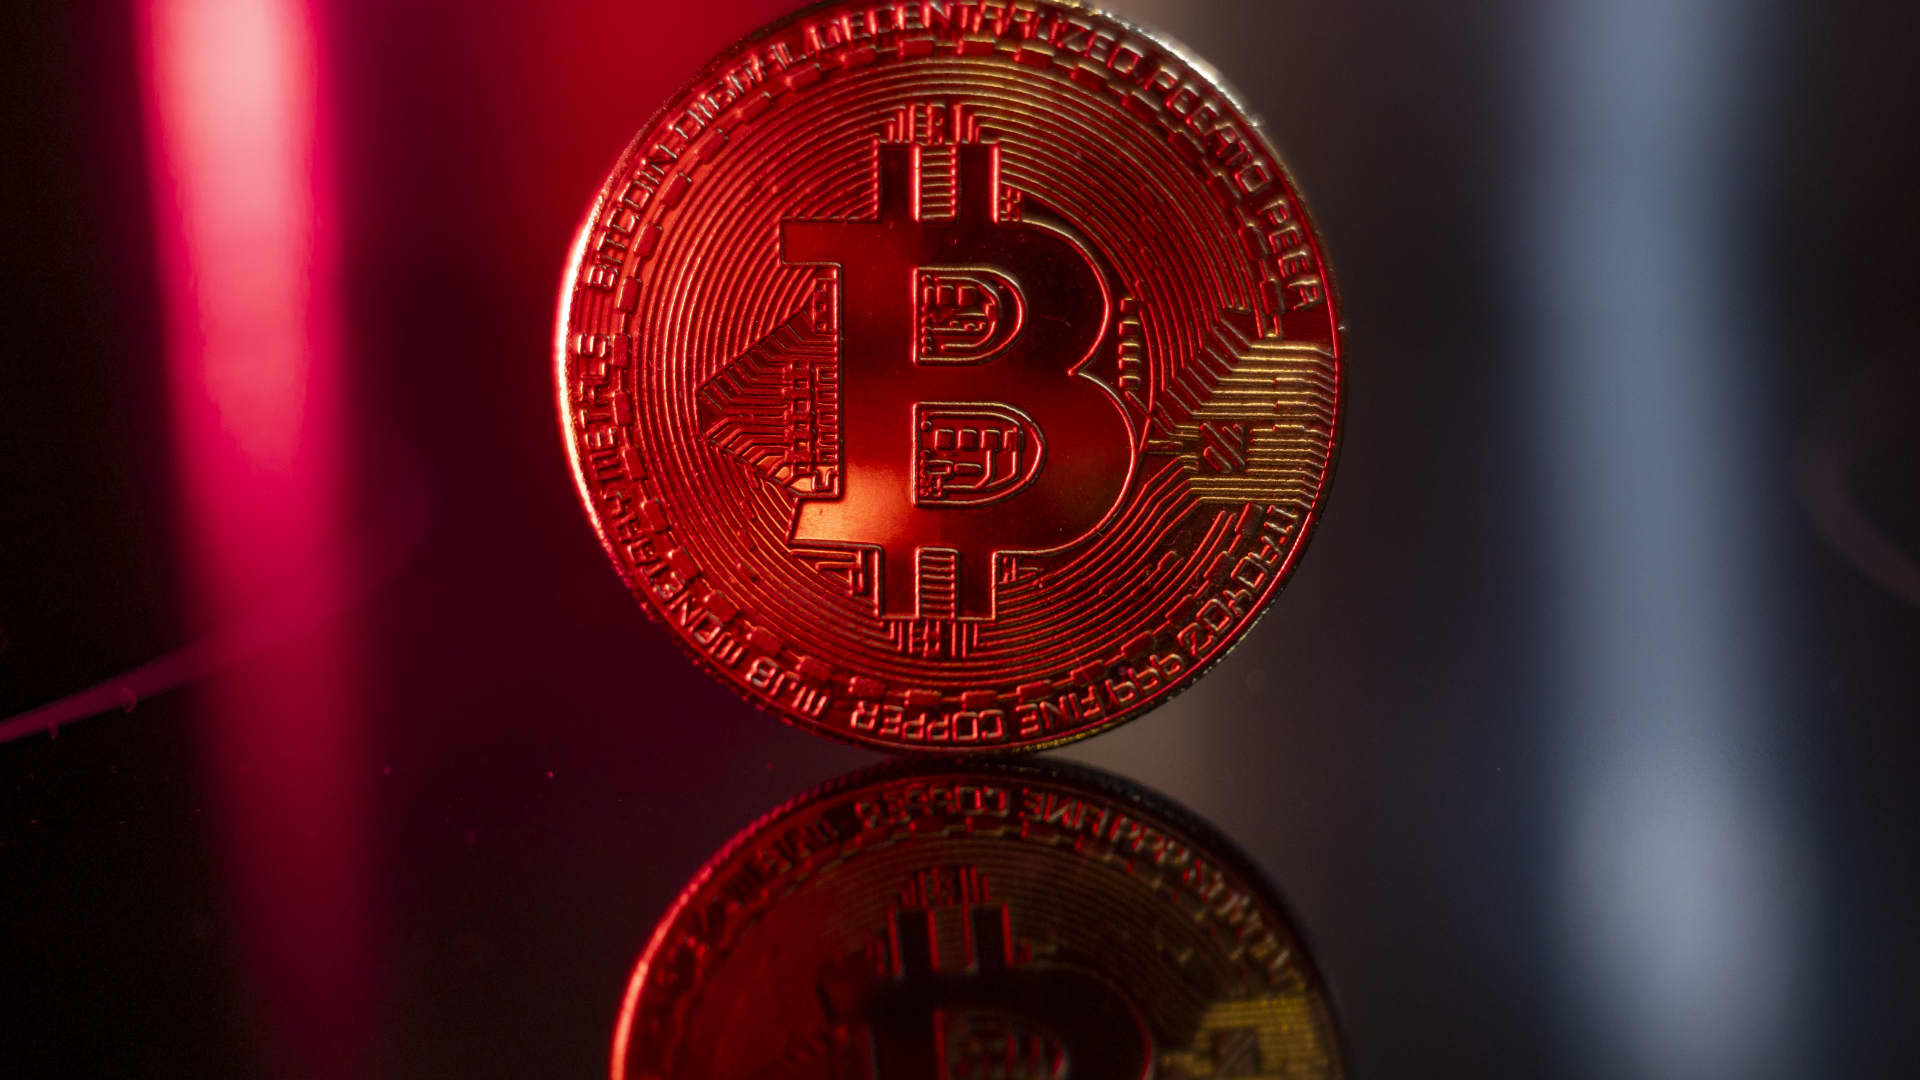 Bitcoin sinks to ,000 to start May as investors brace for Fed rate decision